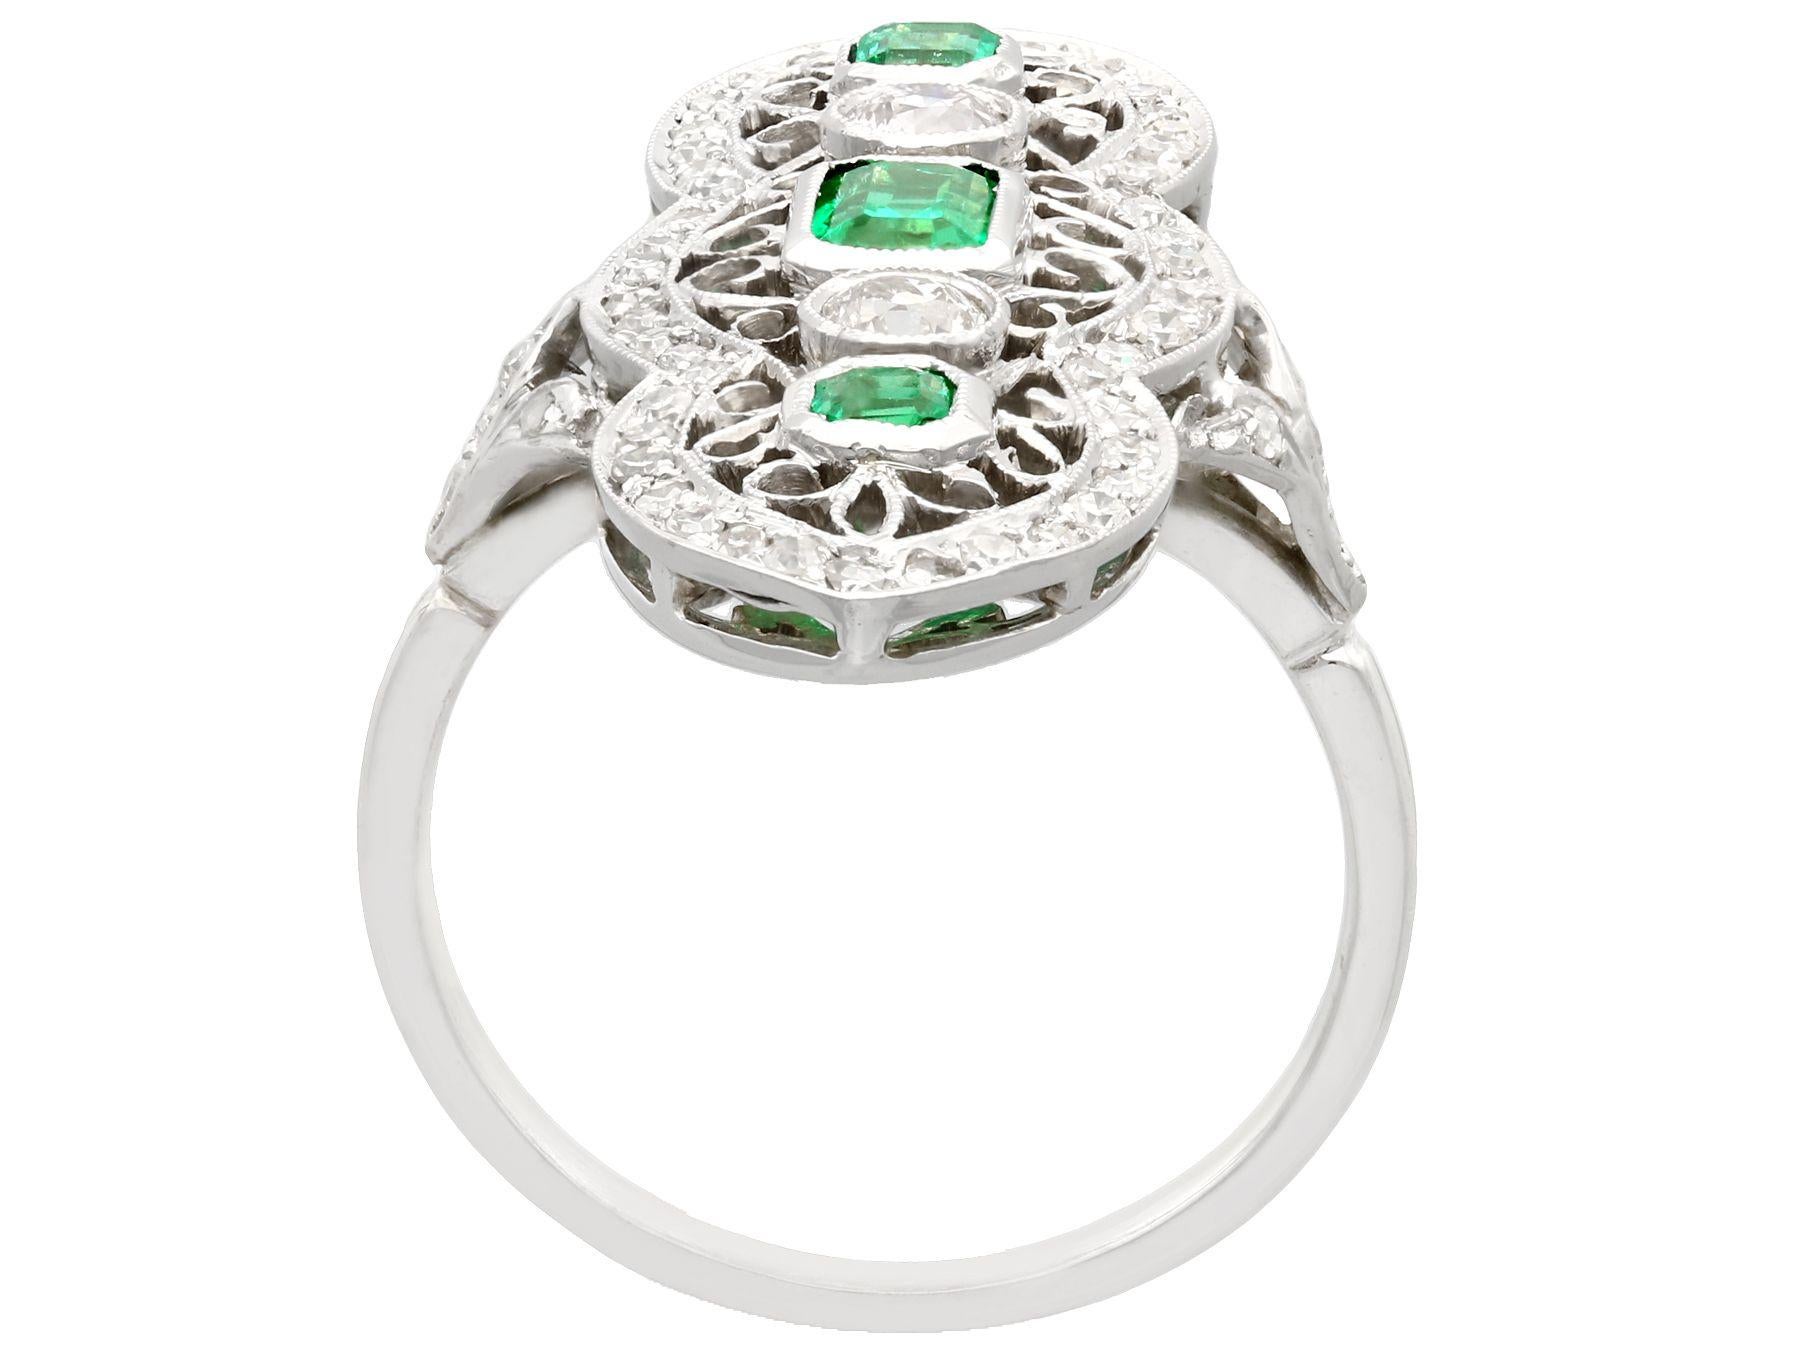 Antique 1.41 Carat Emerald Cut Diamond and Emerald Gold Marquise Ring For Sale 1